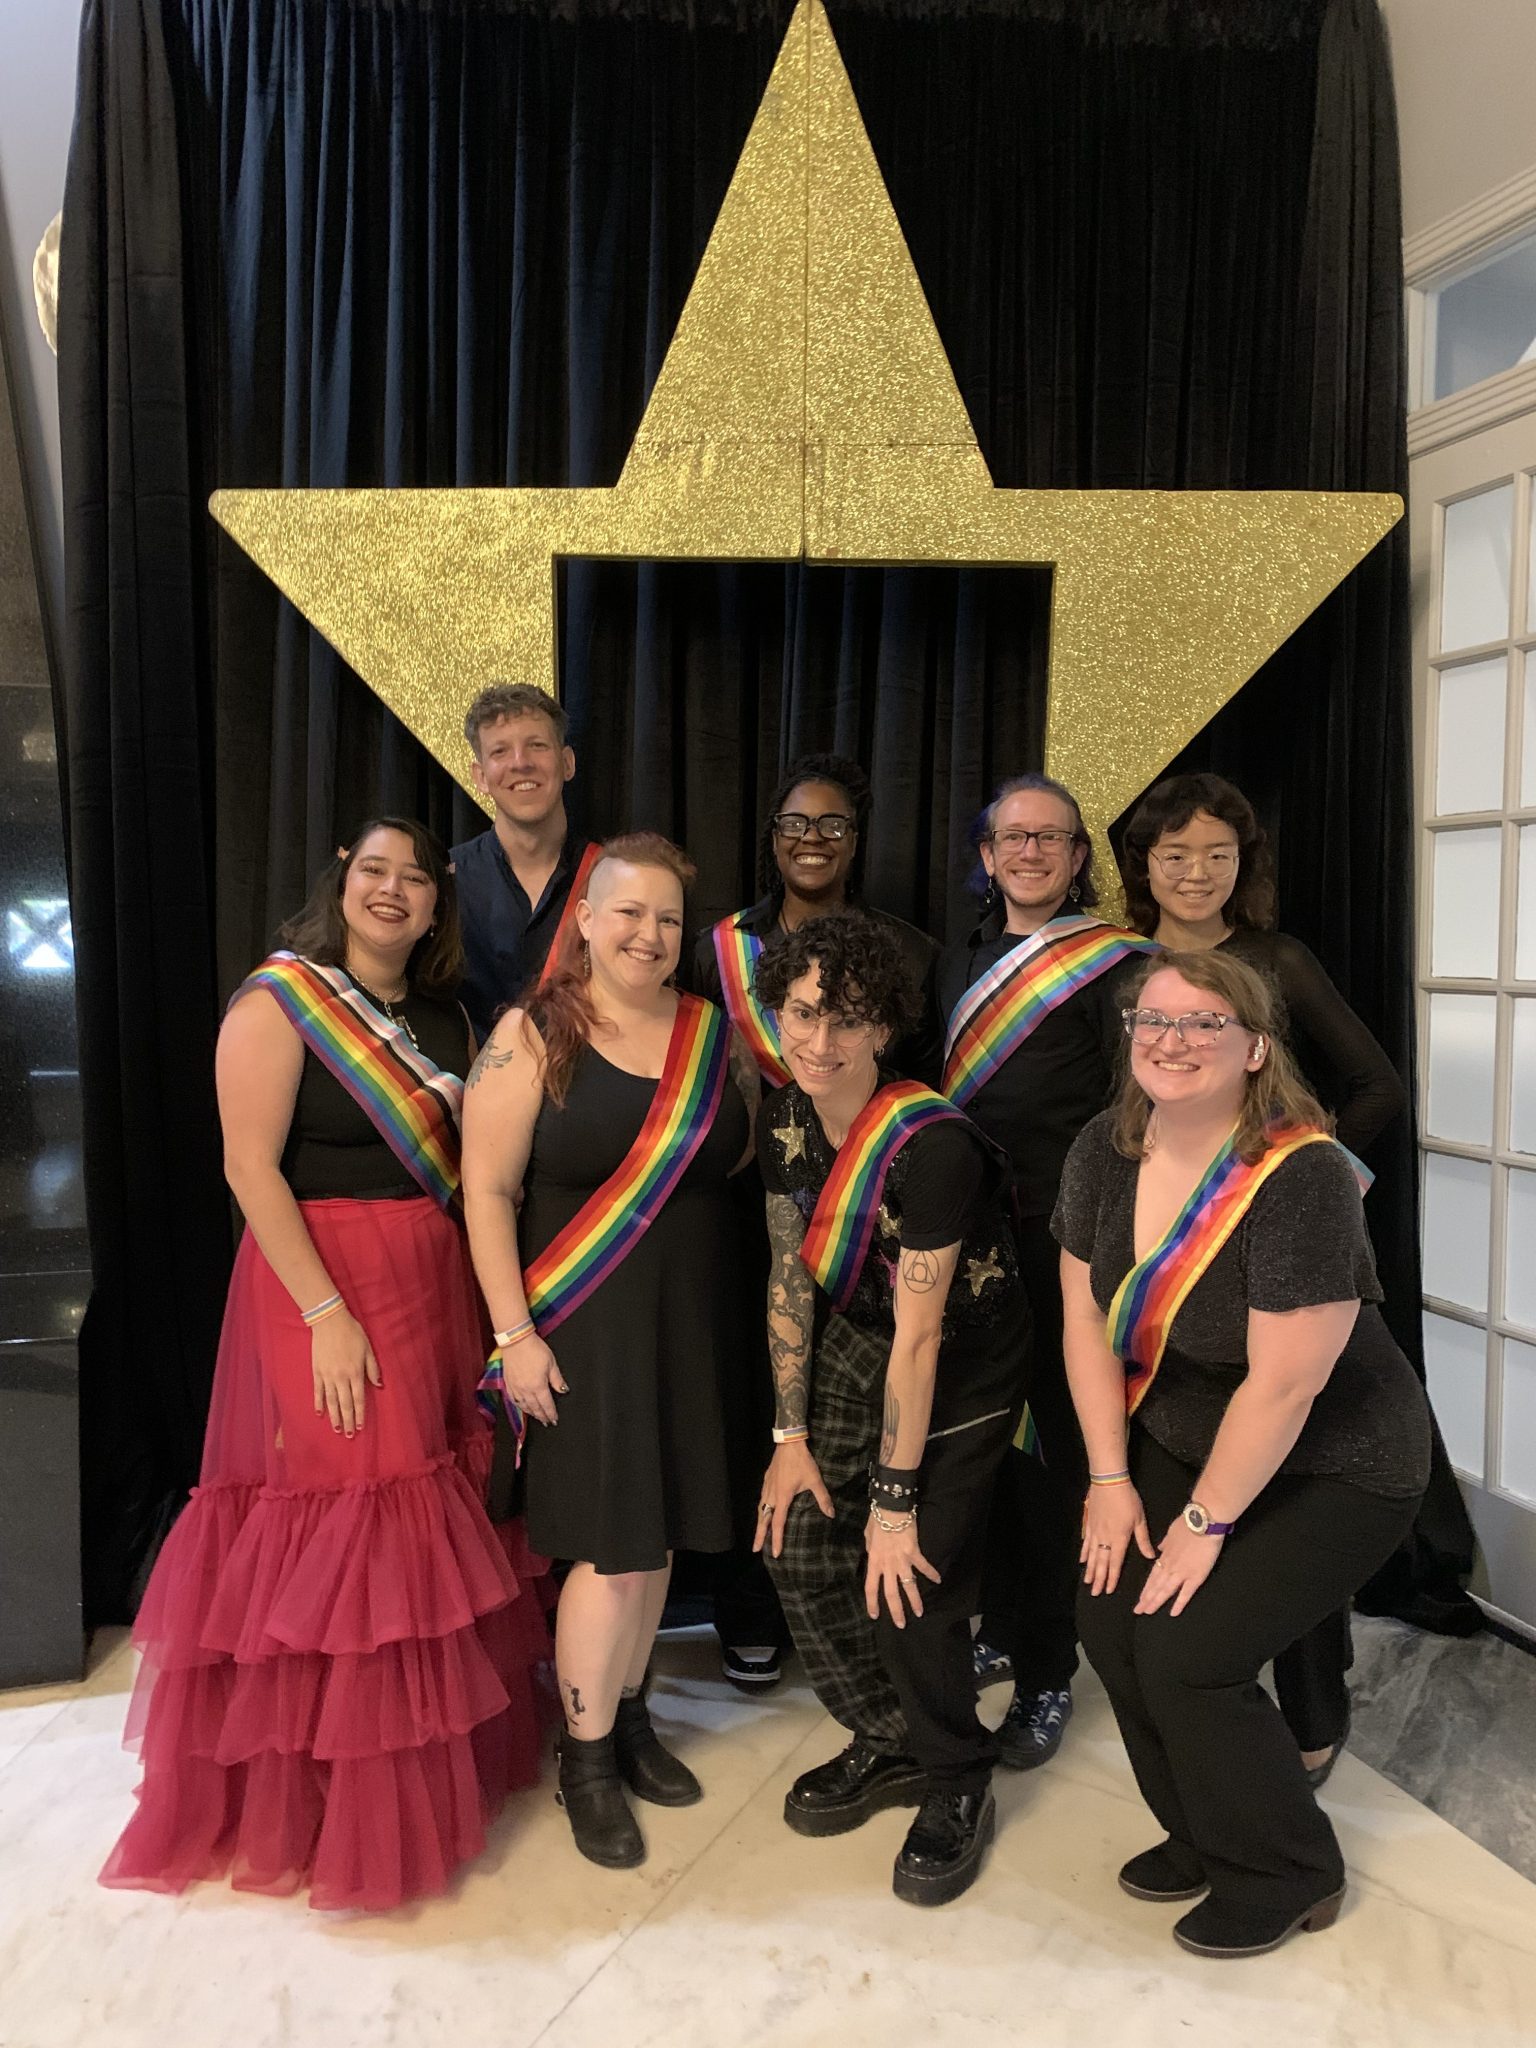 A diverse group of eight individuals wearing rainbow pride sashes pose for a photo in front of a golden star backdrop at a youth prom event.